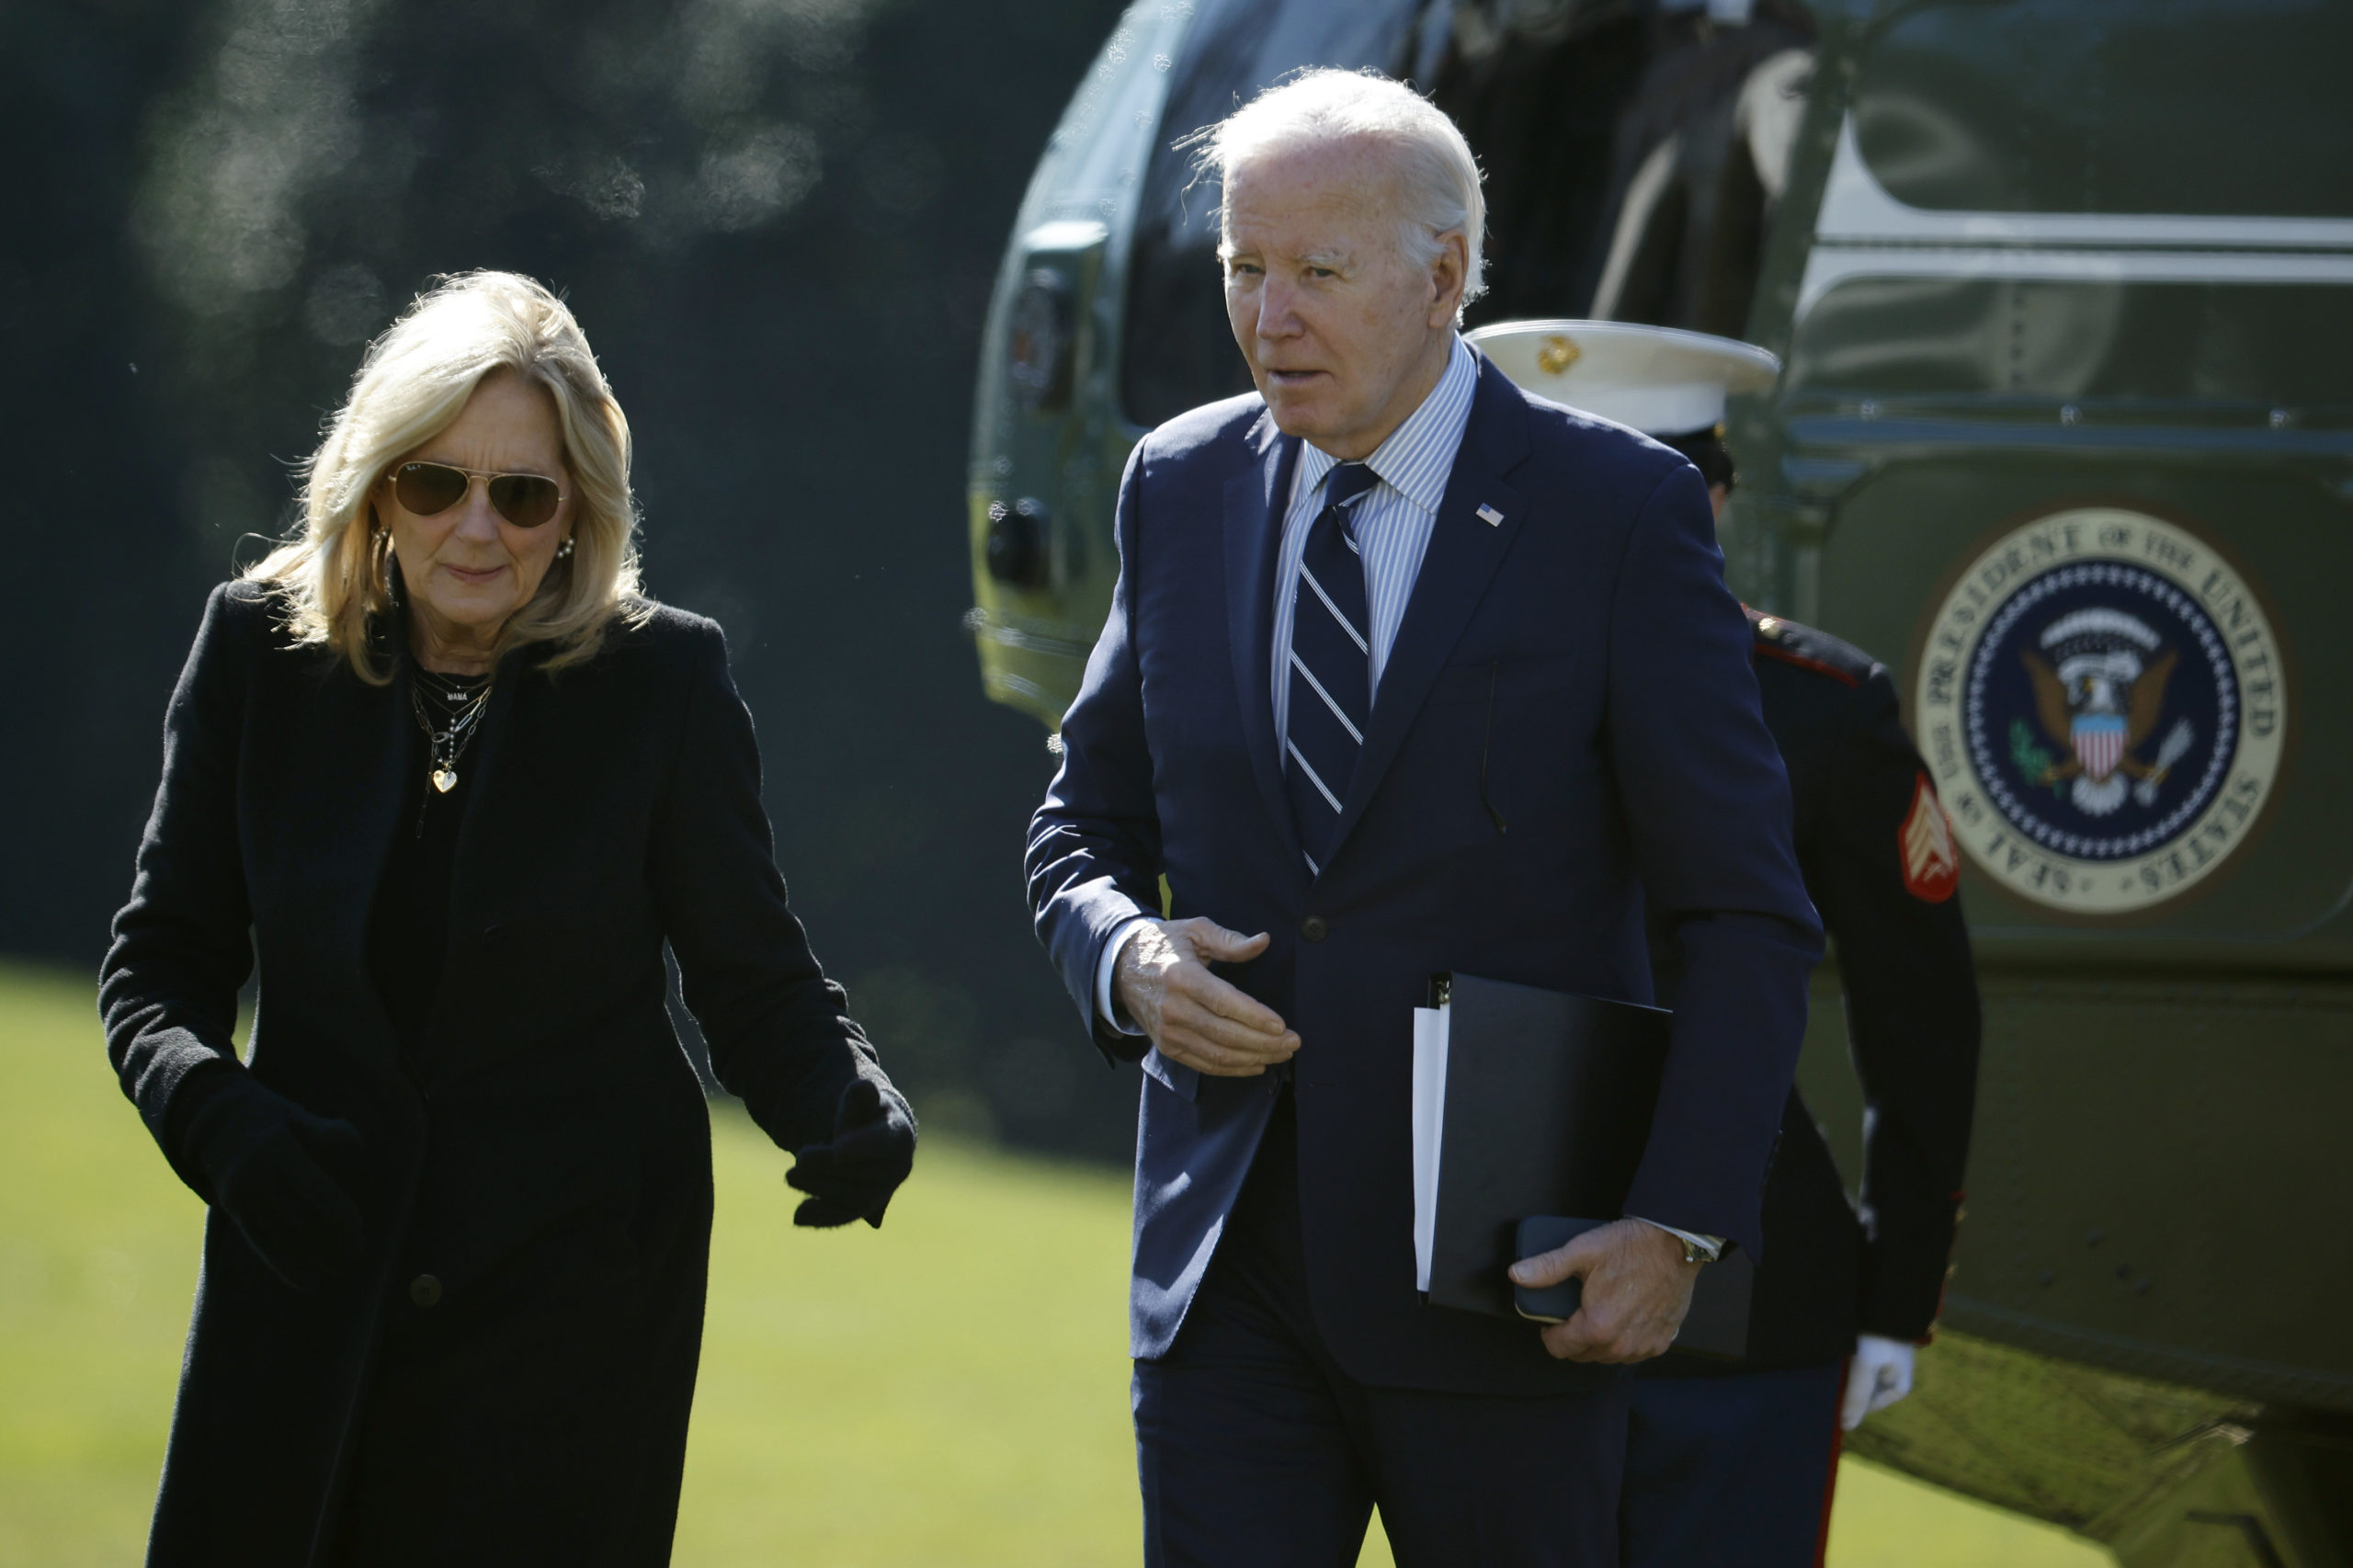  U.S. President Joe Biden and first lady Jill Biden walk across the South Lawn while returning to the White House on February 19, 2024 in Washington, DC. The Bidens returned to the White House after spending the weekend in Delaware. (Photo by Chip Somodevilla/Getty Images)